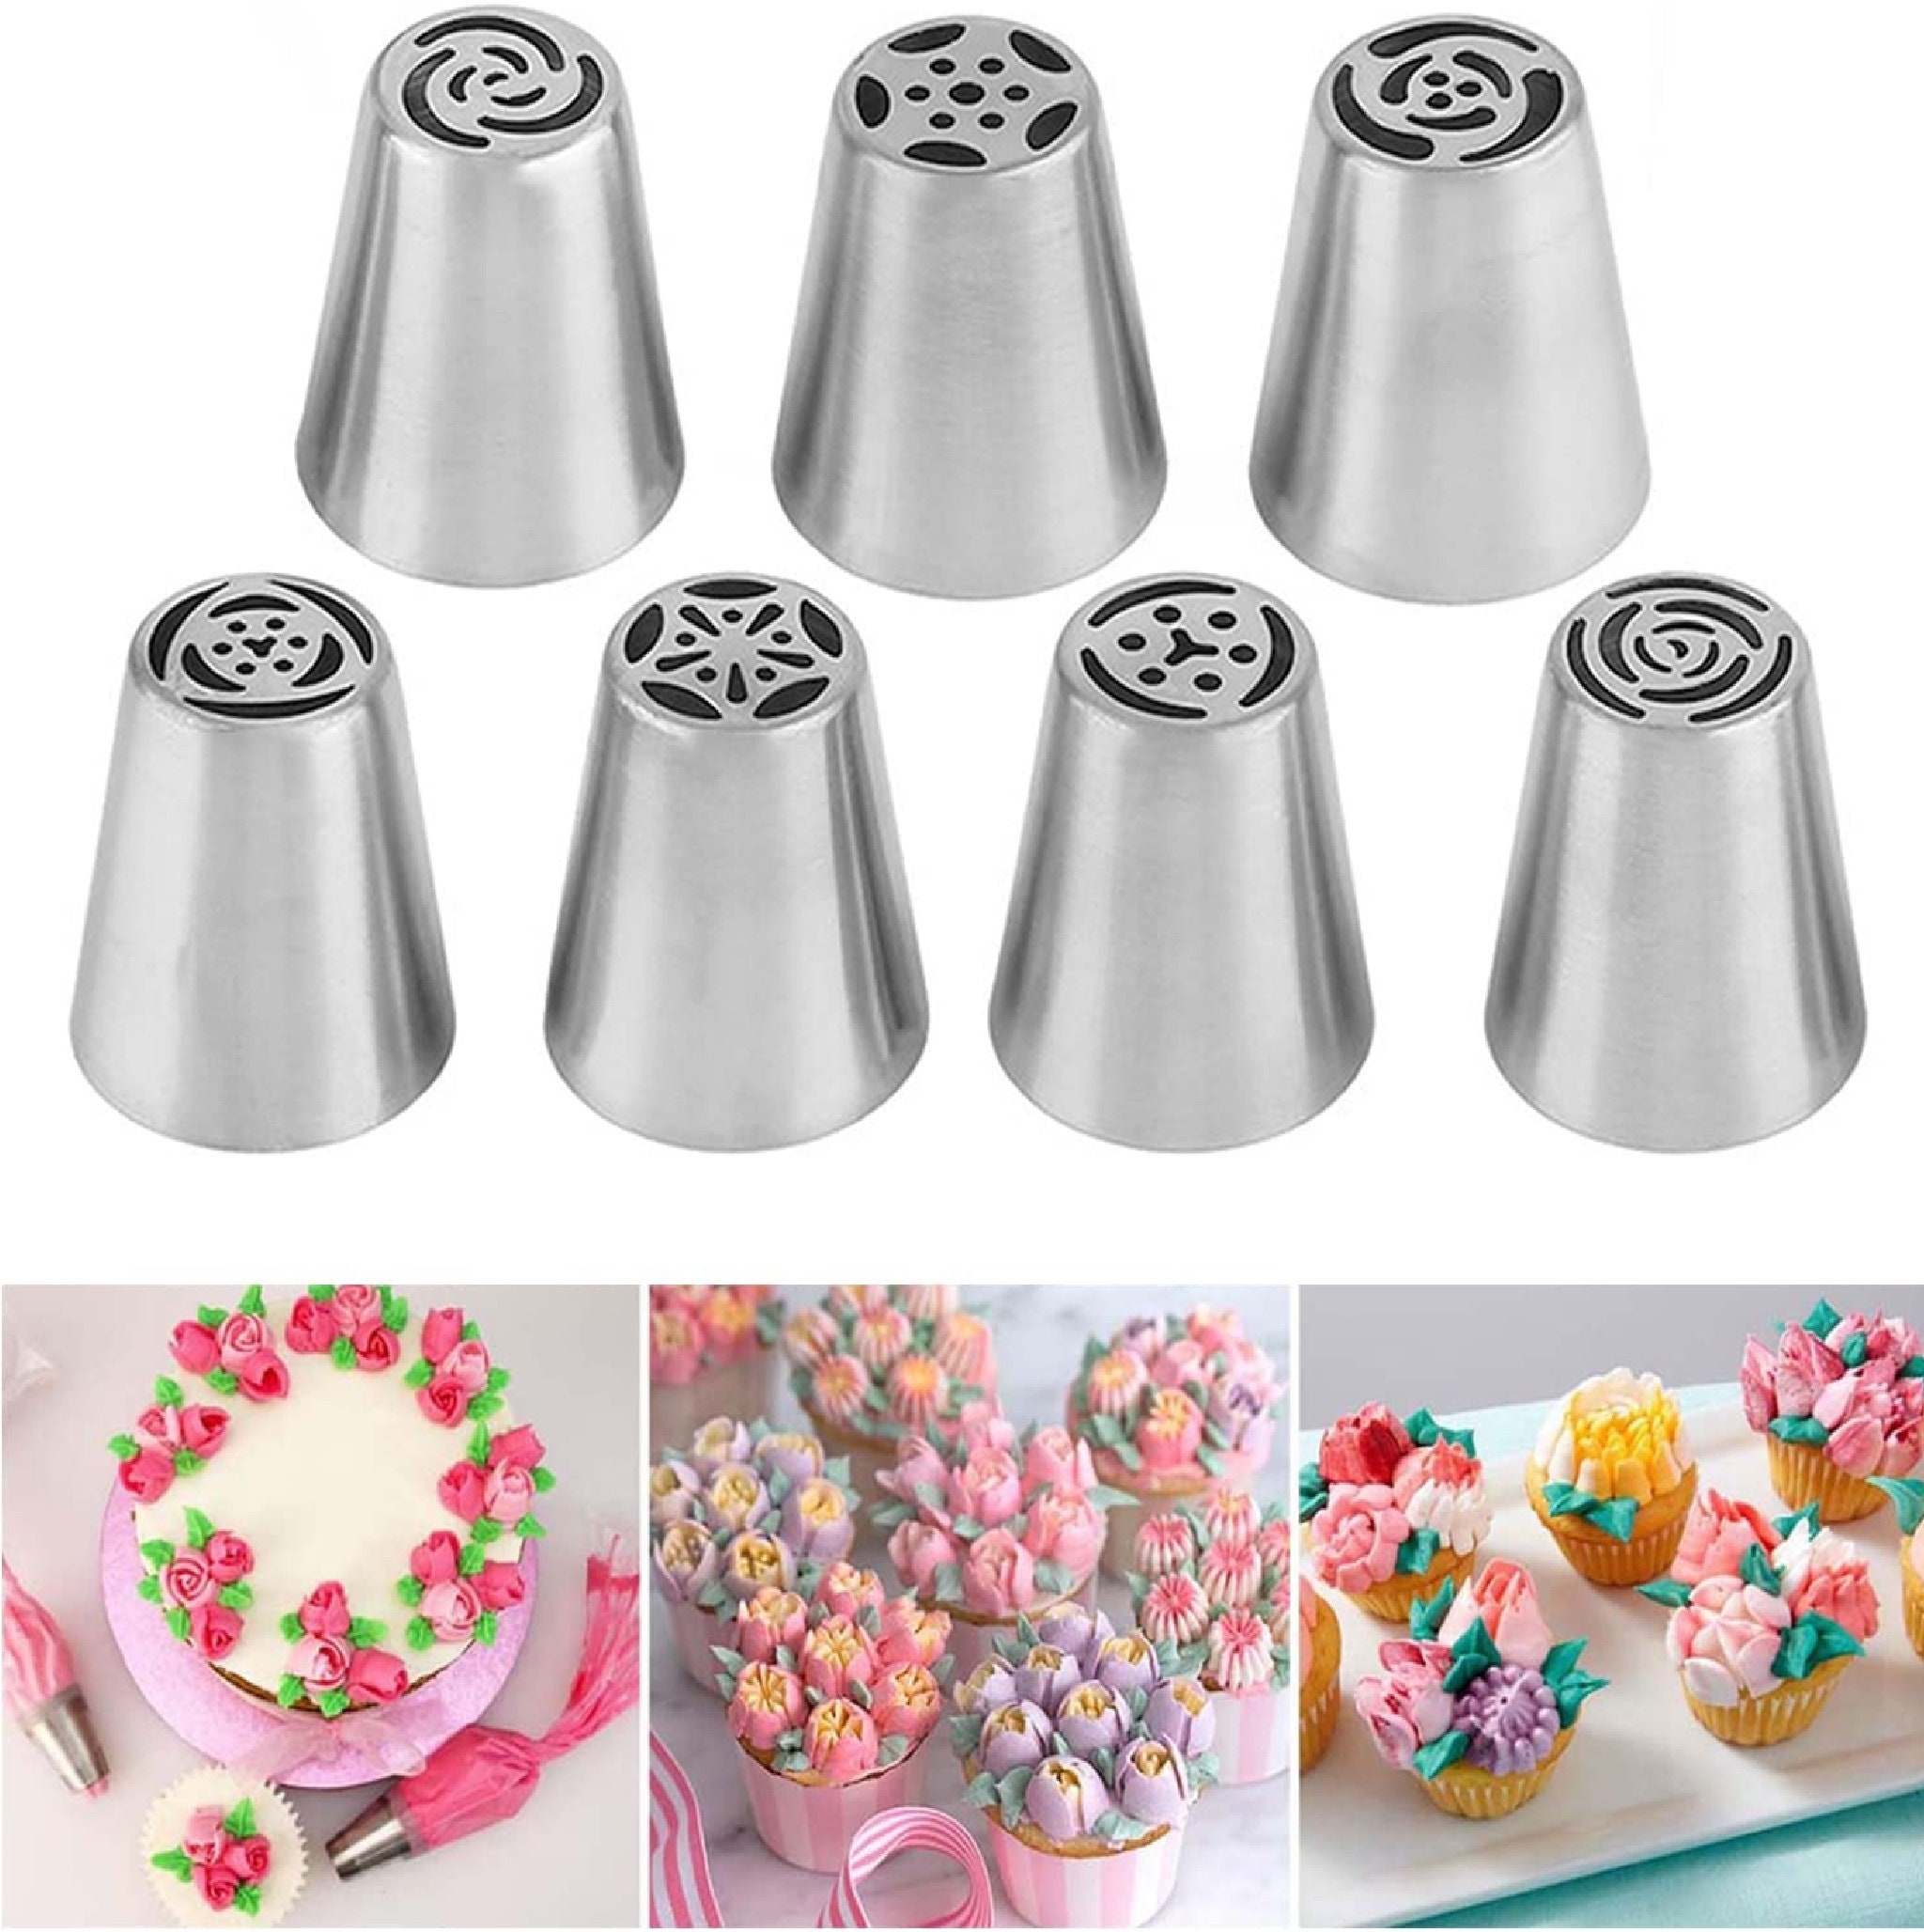 52 Pieces Cake Decorating Supplies Sets With Icing Tips Pastry